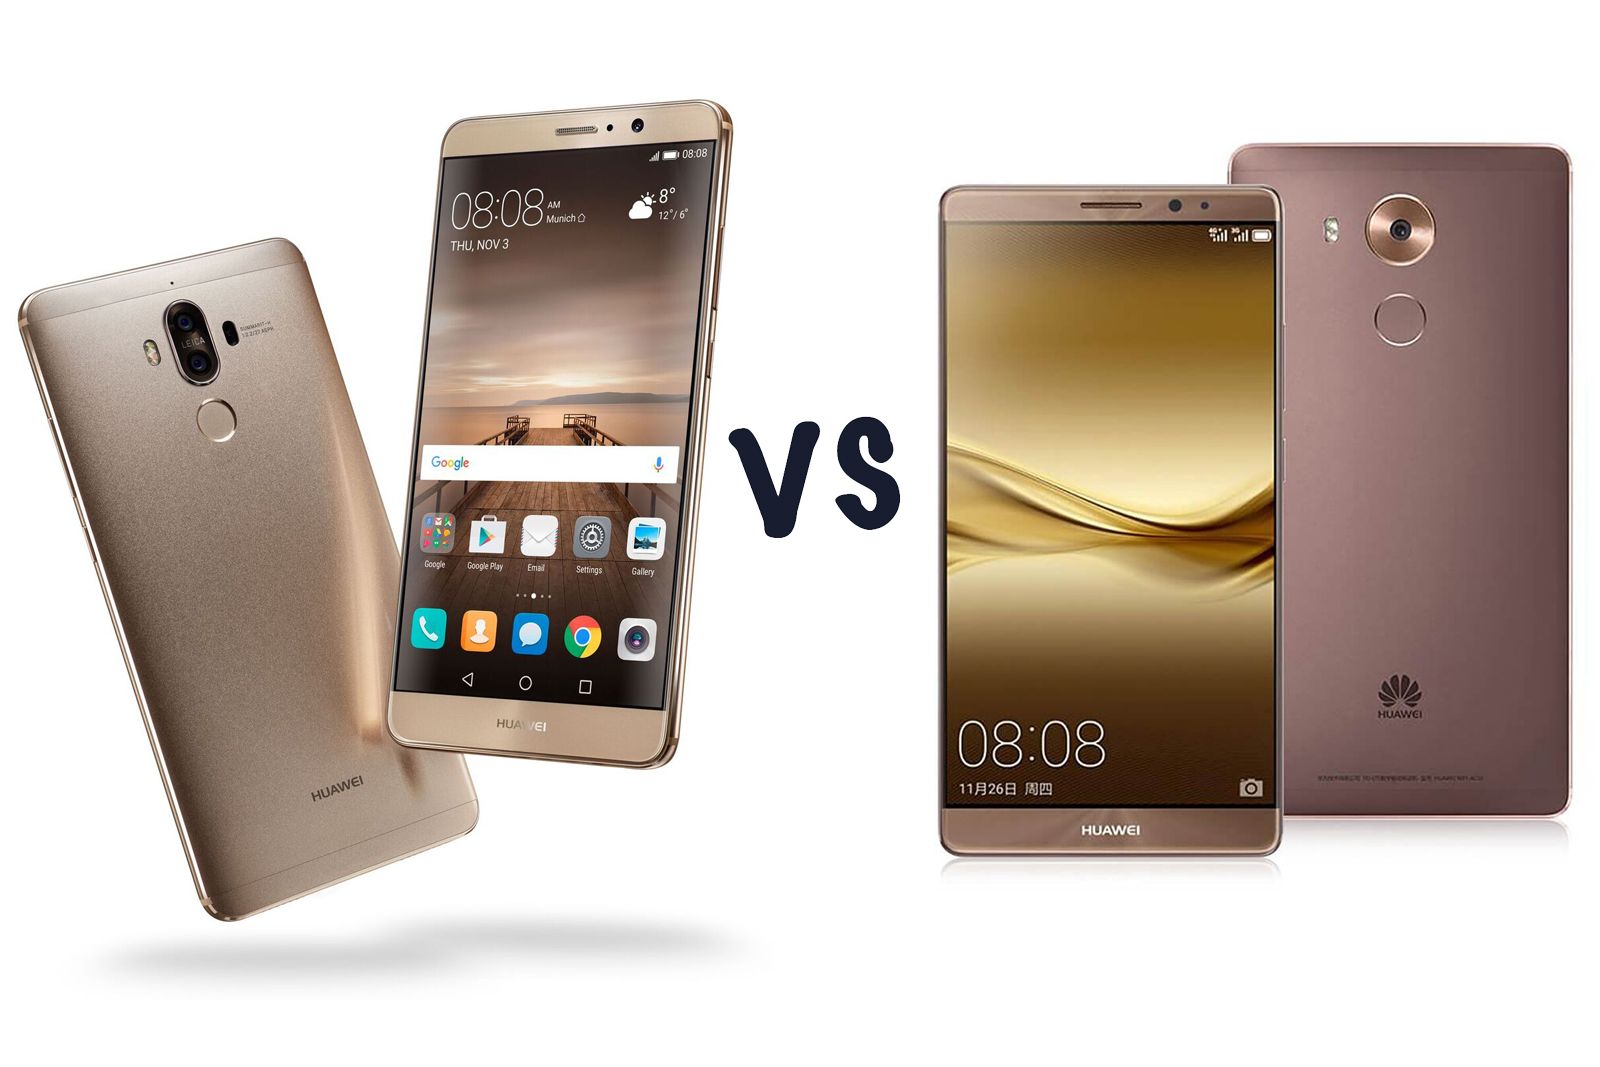 huawei mate 9 vs huawei mate 8 what s the difference  image 1